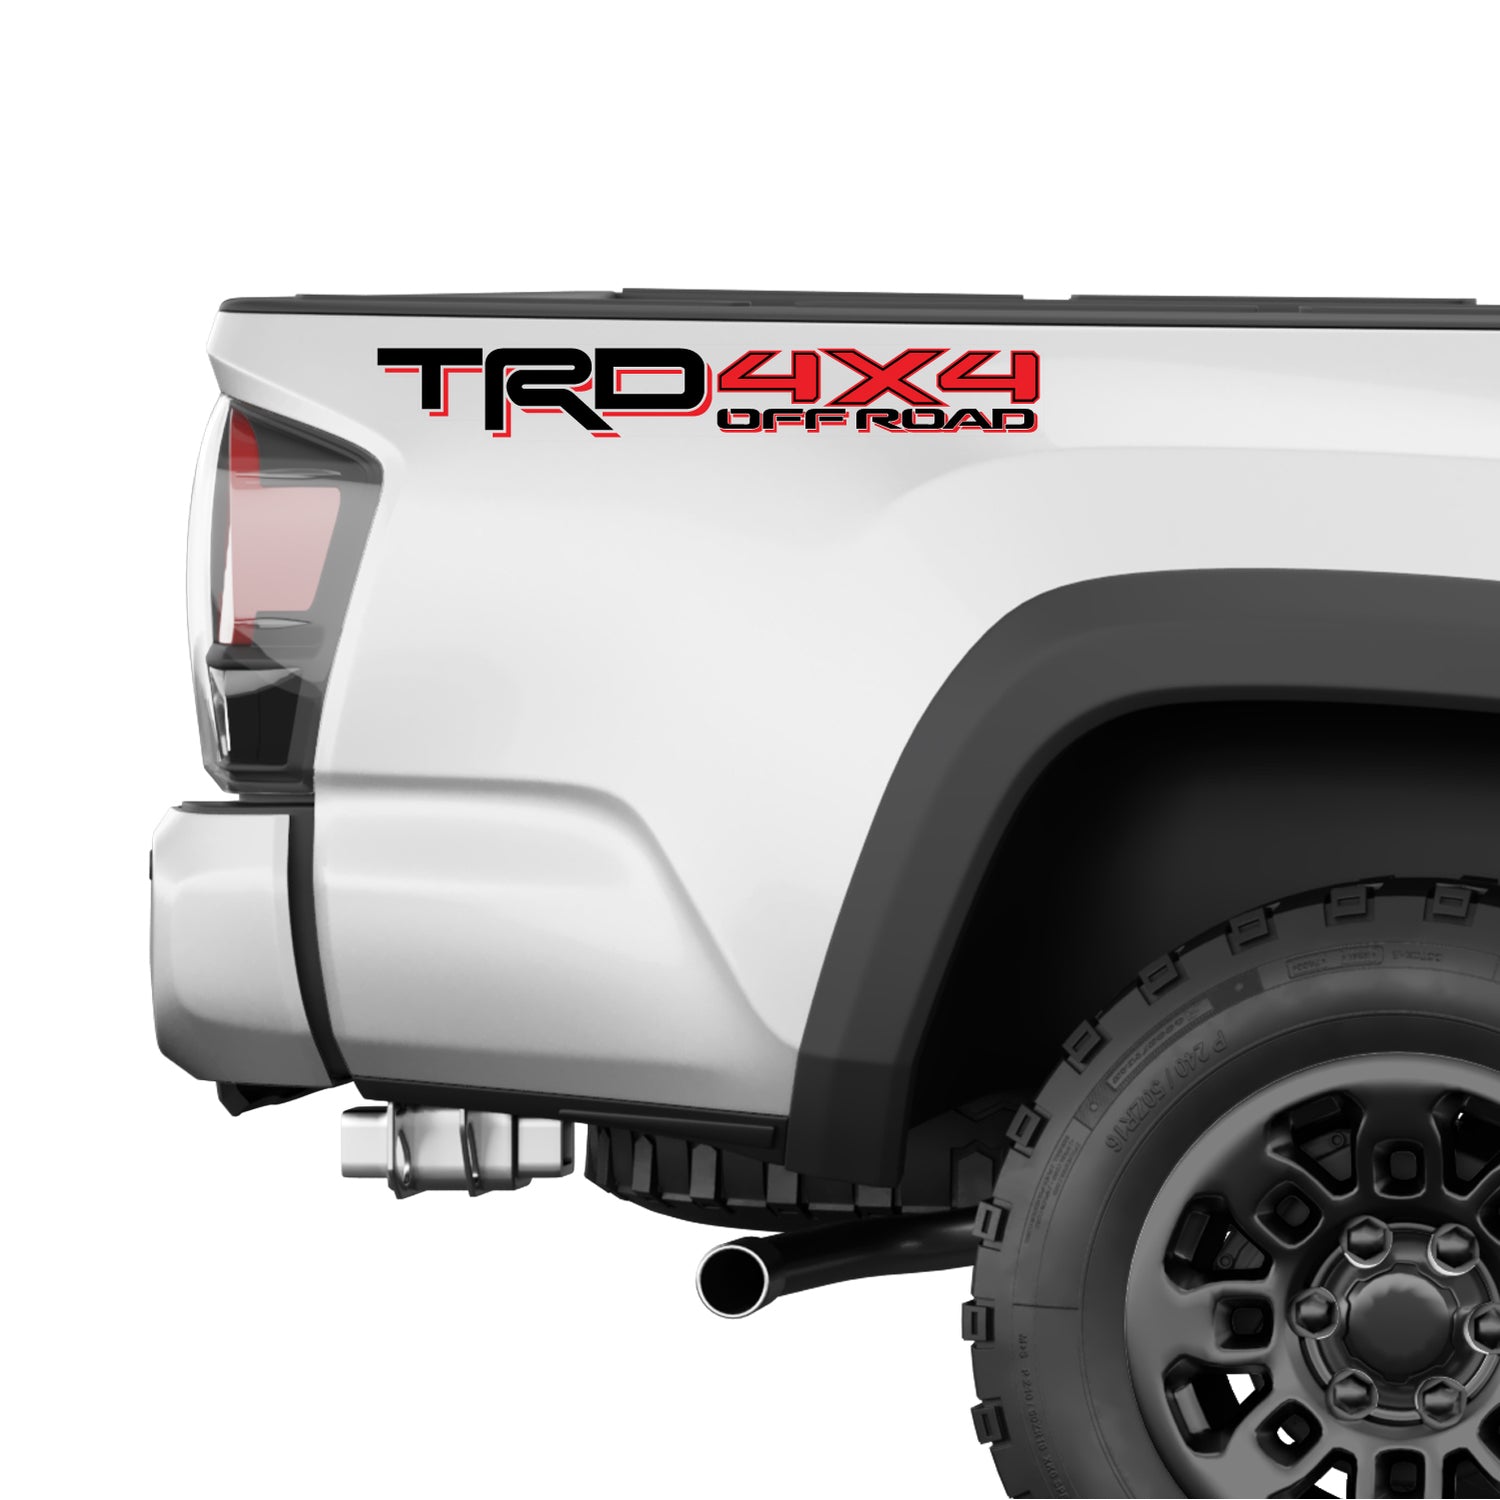 TRD 4x4 Off Road Decals Stickers | Red-Black - TiresFX